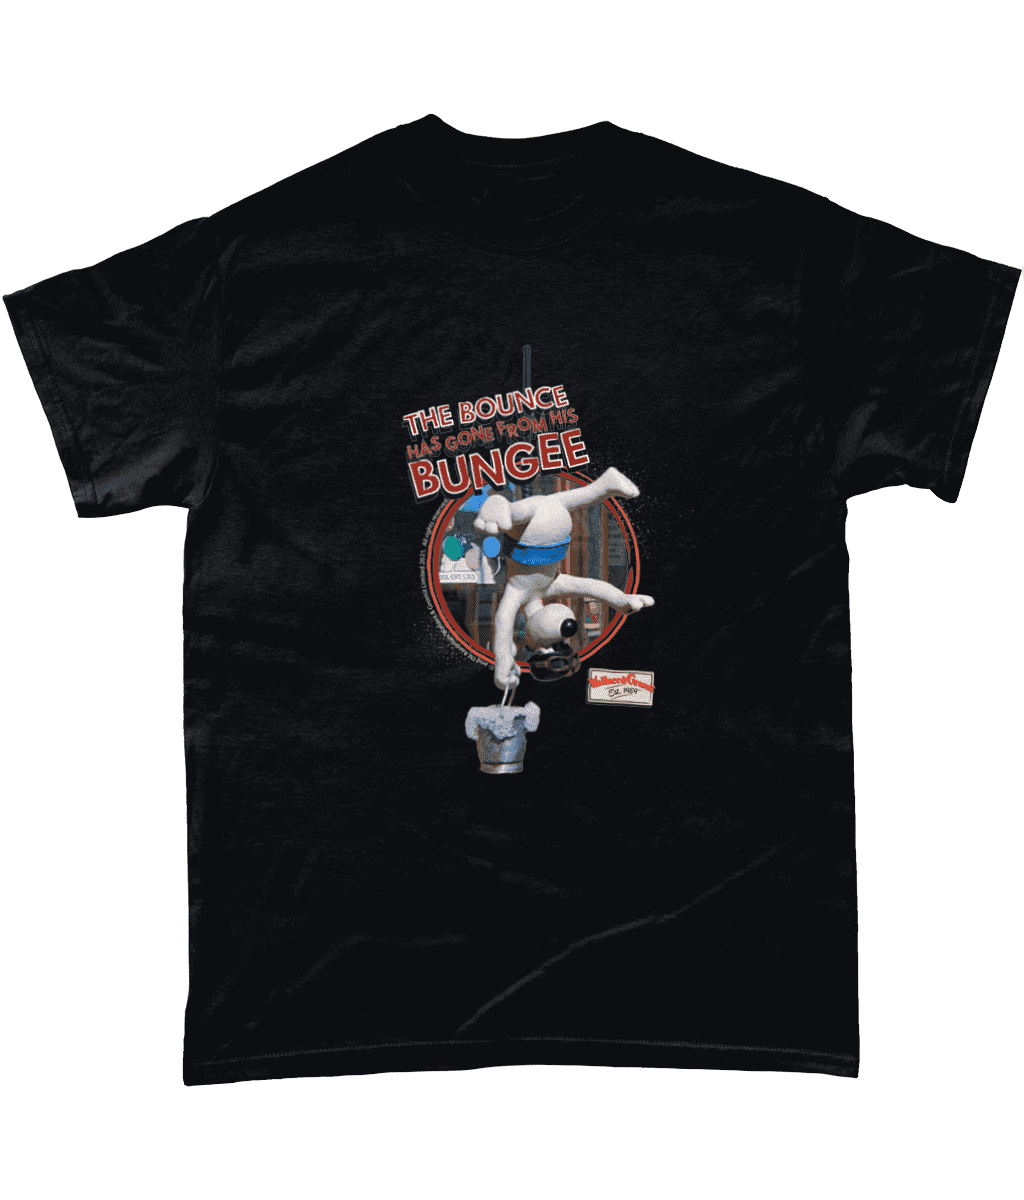 Wallace and Gromit T-Shirt Bounce Has Gone From His Bungee A Close Shave Men's Black